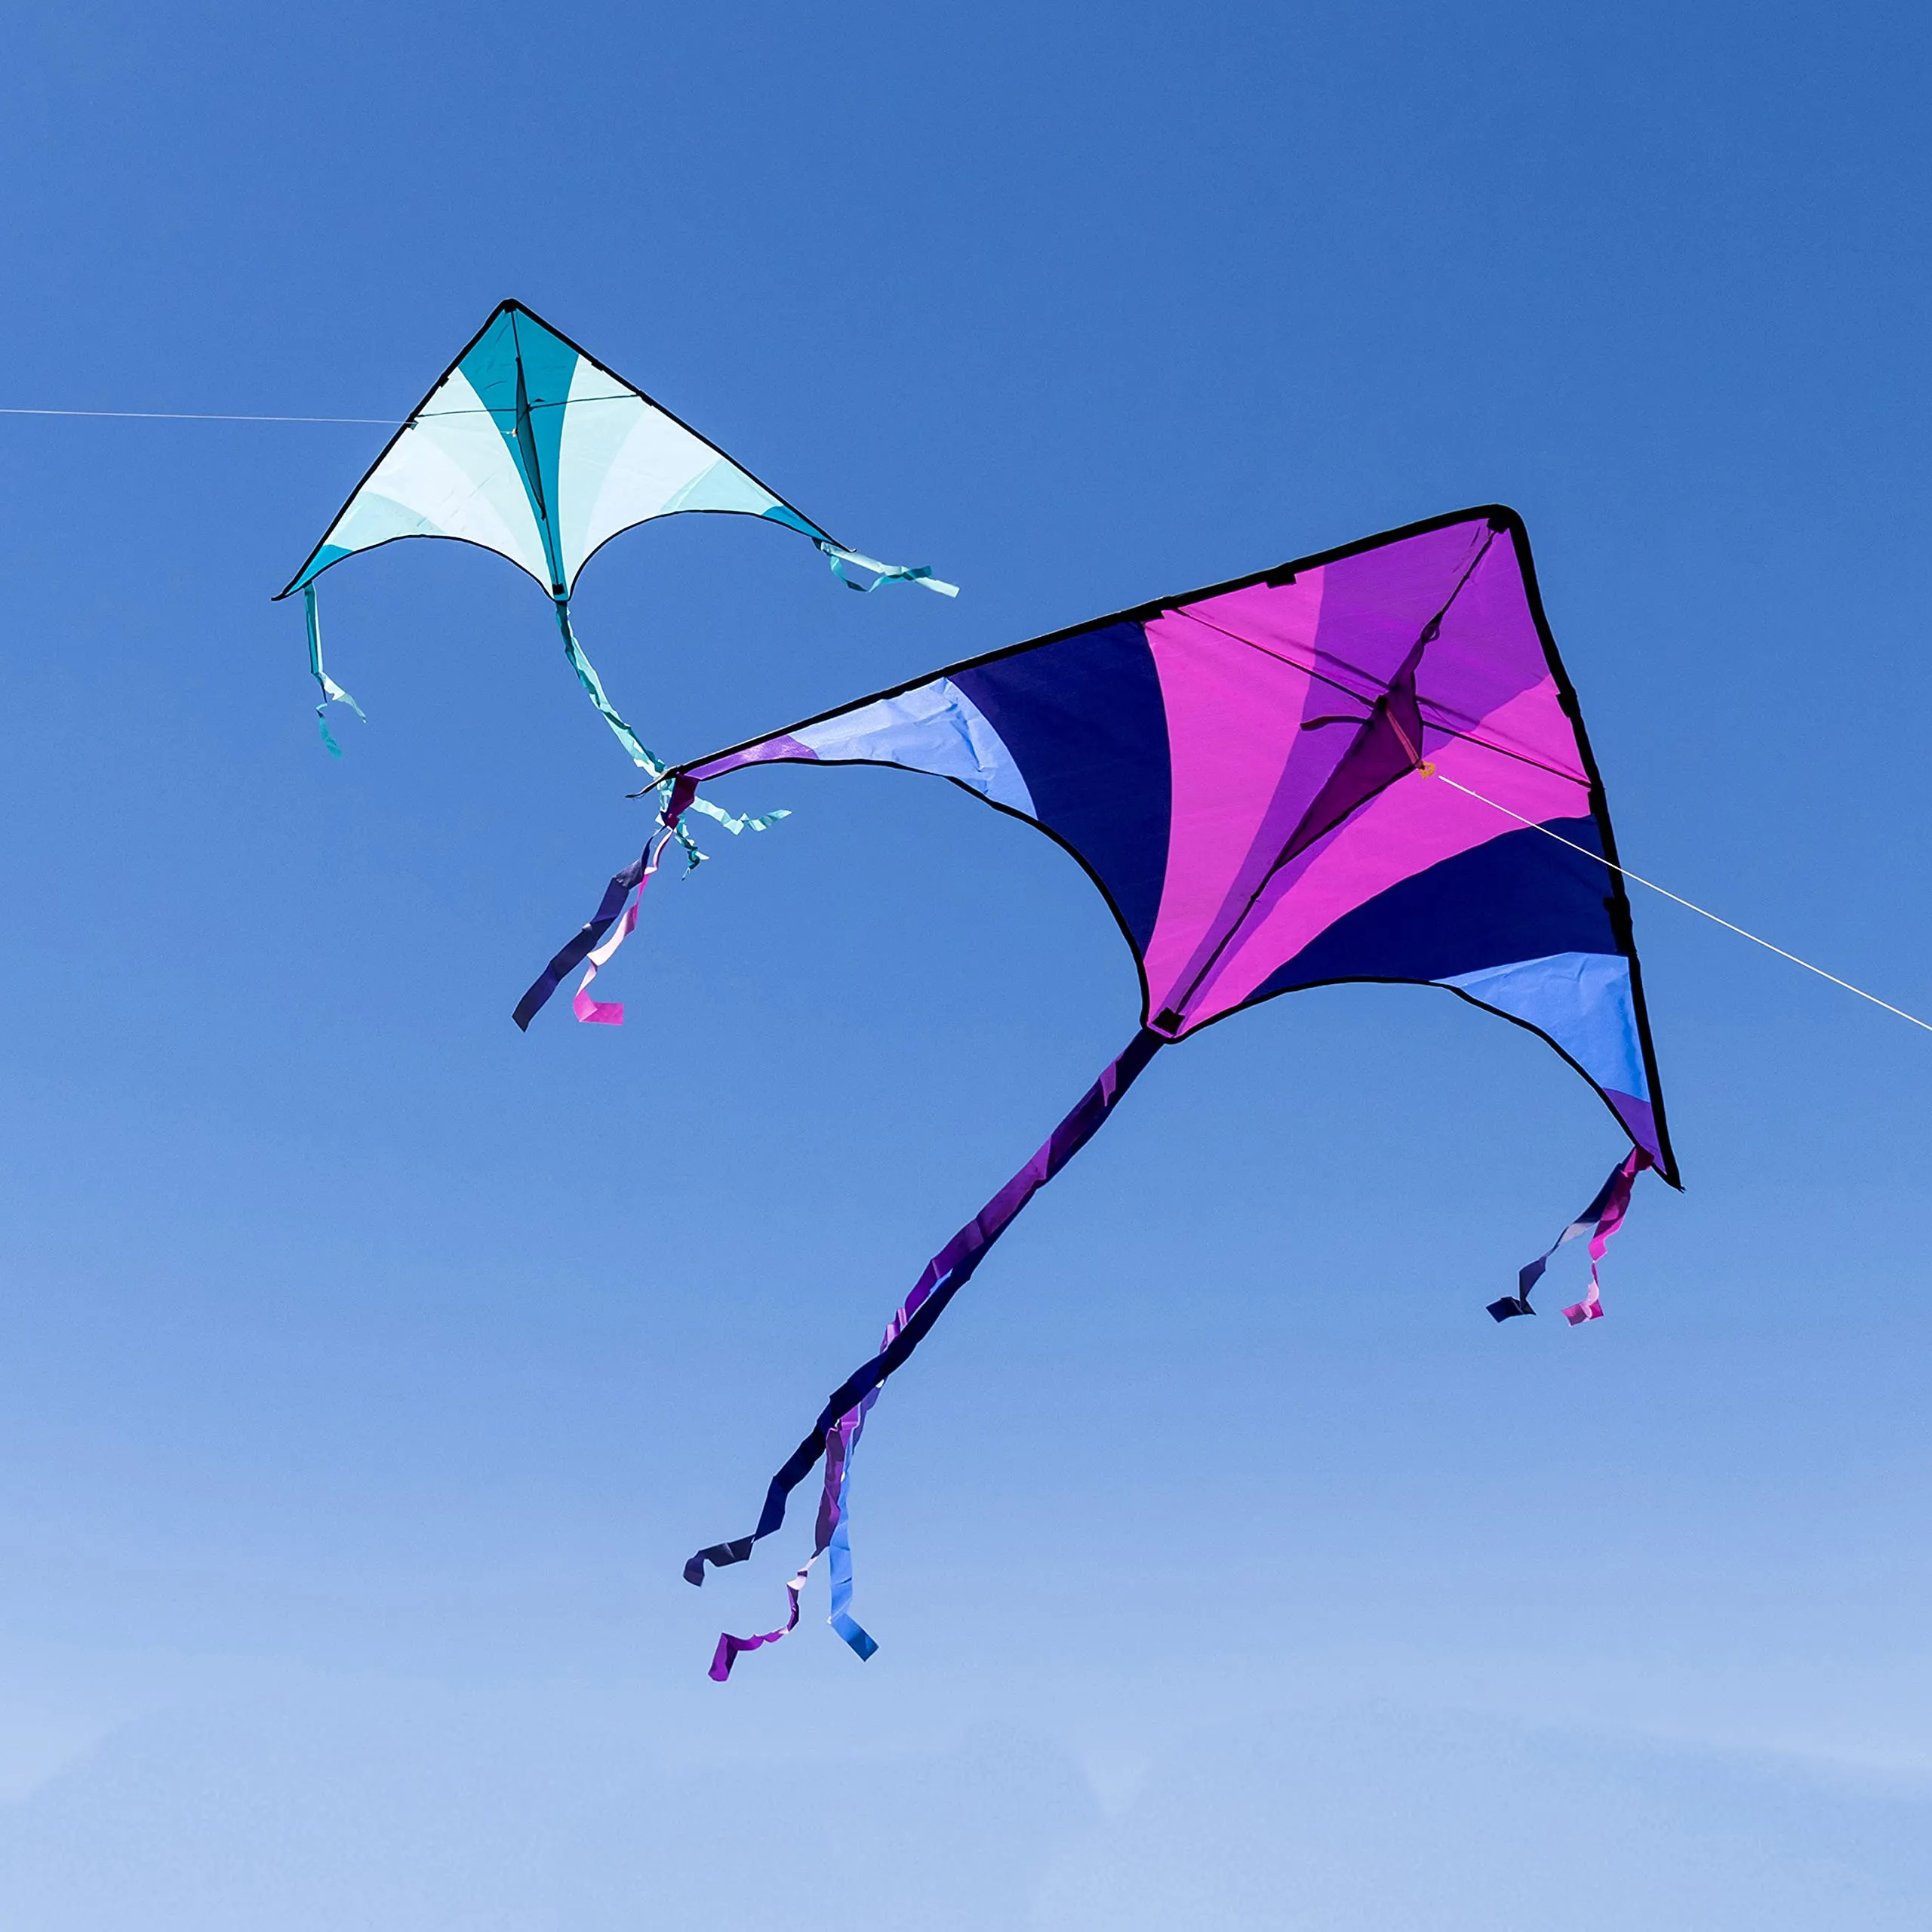 JOYIN 2 Packs Large Delta Kite Blue and Purple Kite Easy to Fly Huge Kites for Kids and Adults with 262.5 ft Kite String, Large Delta Beach Kite for